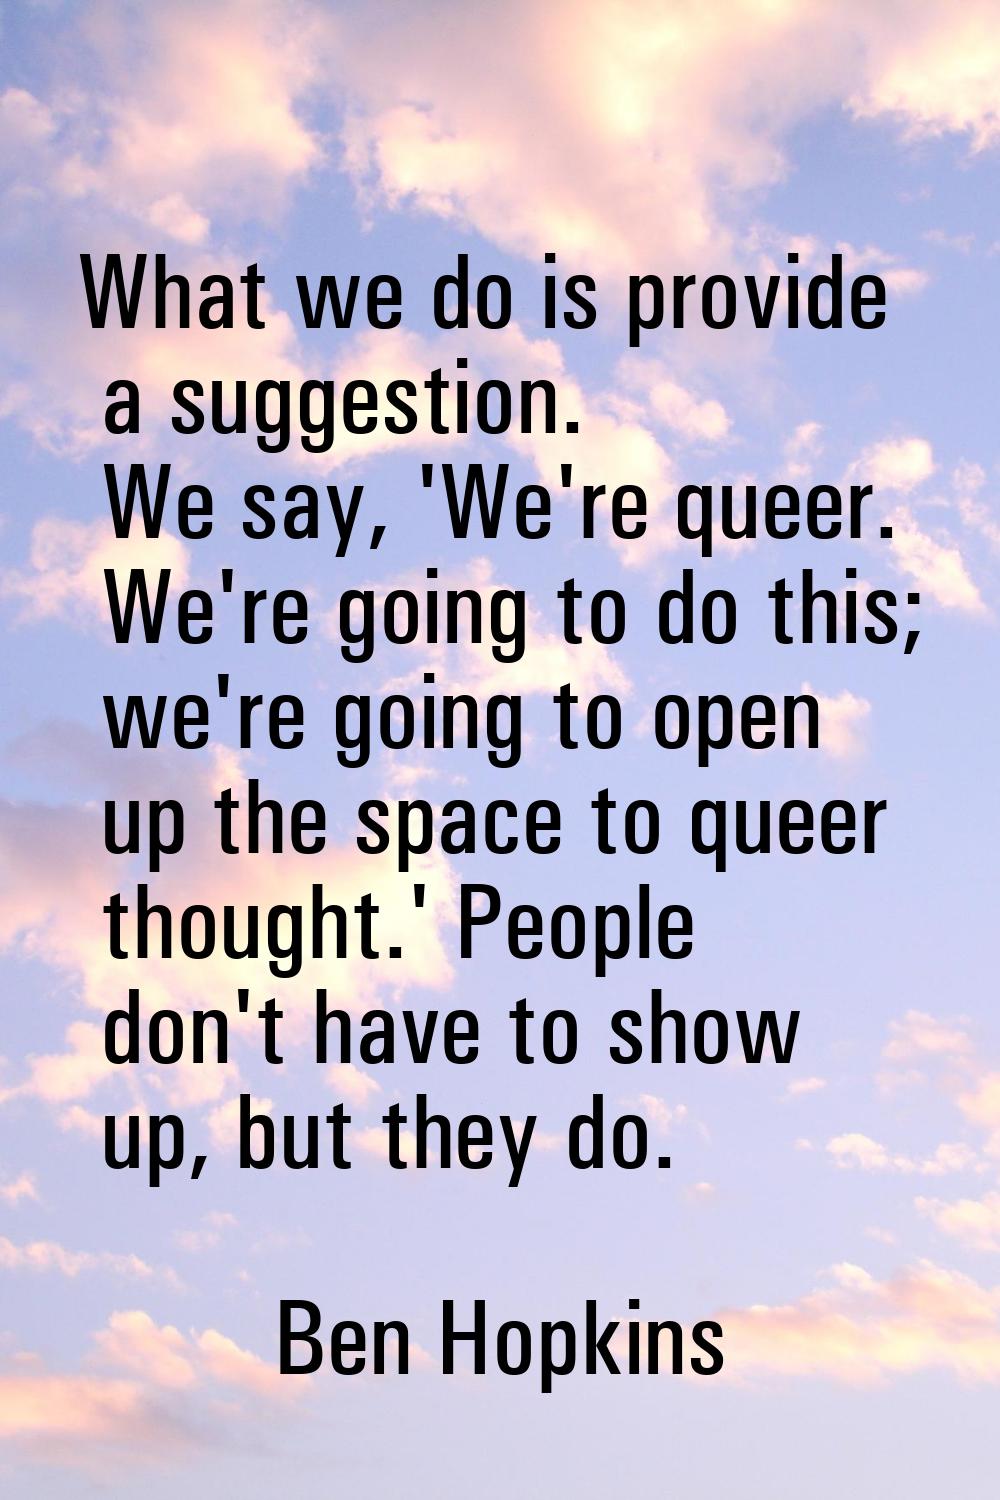 What we do is provide a suggestion. We say, 'We're queer. We're going to do this; we're going to op